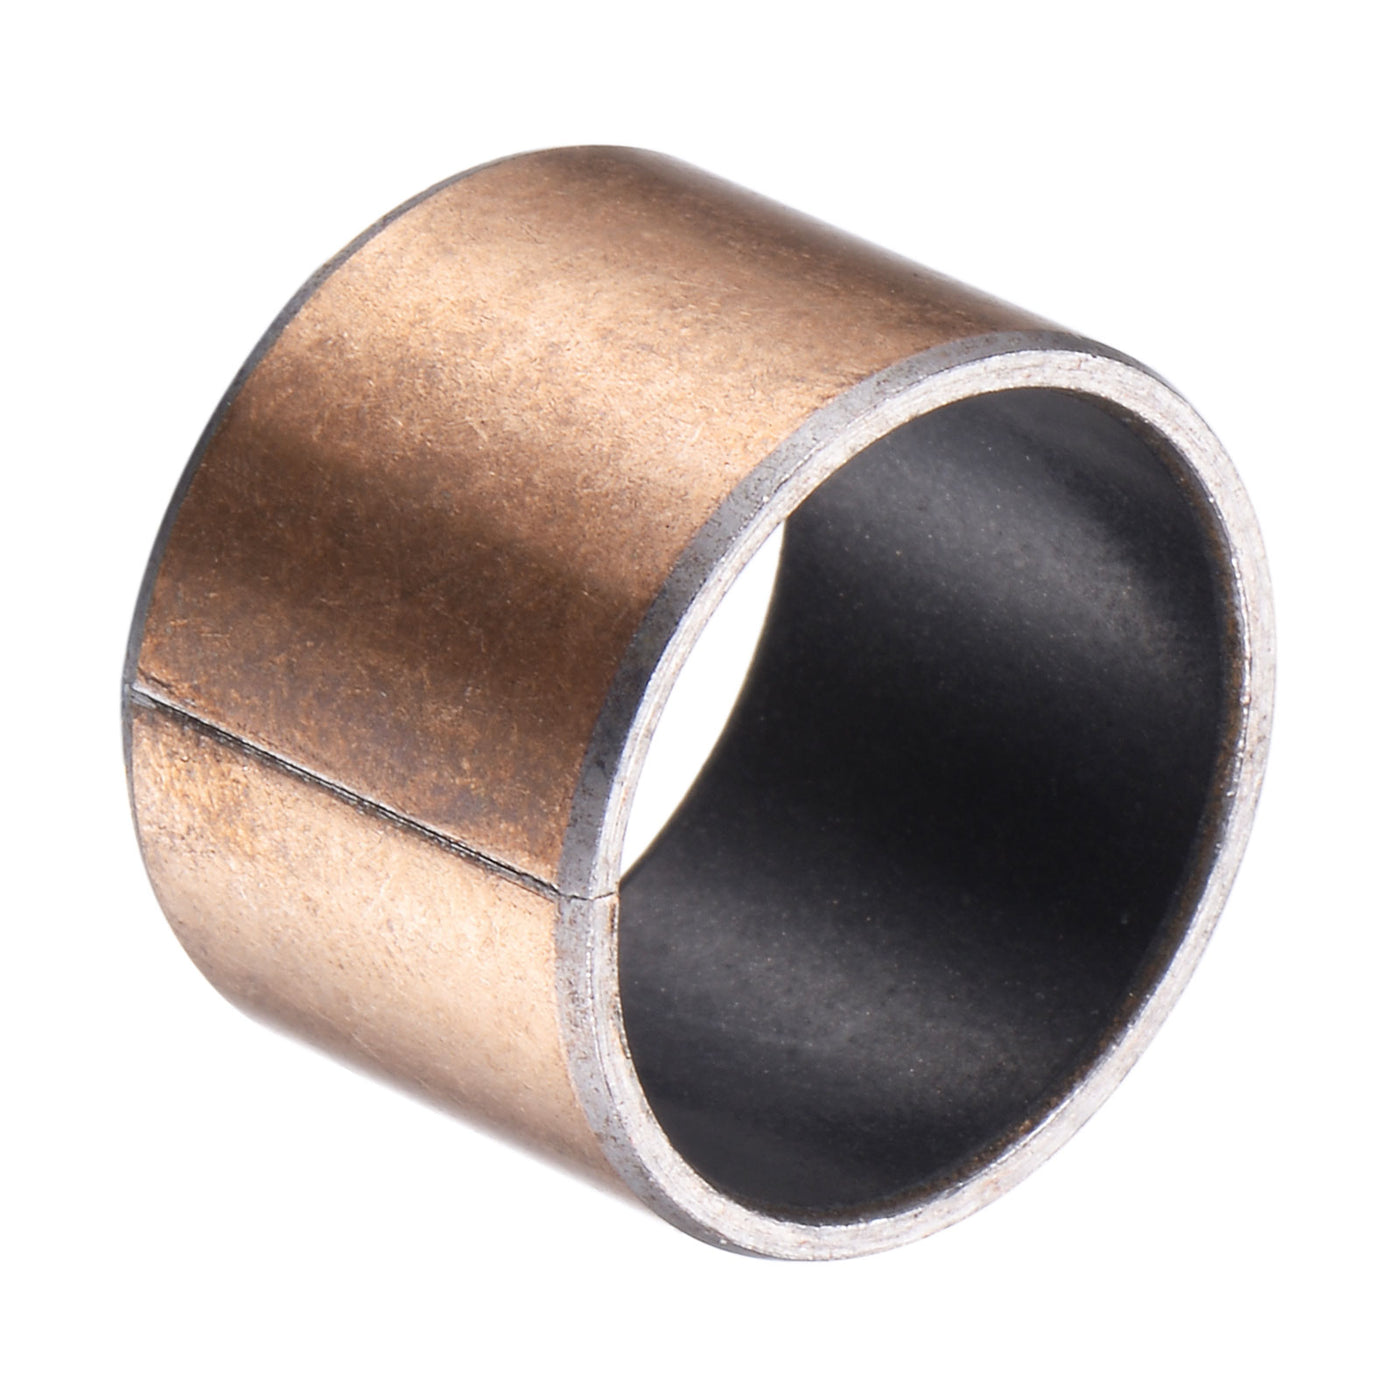 uxcell Uxcell Sleeve Bearing Length Plain Bearings Wrapped Oilless Bushings